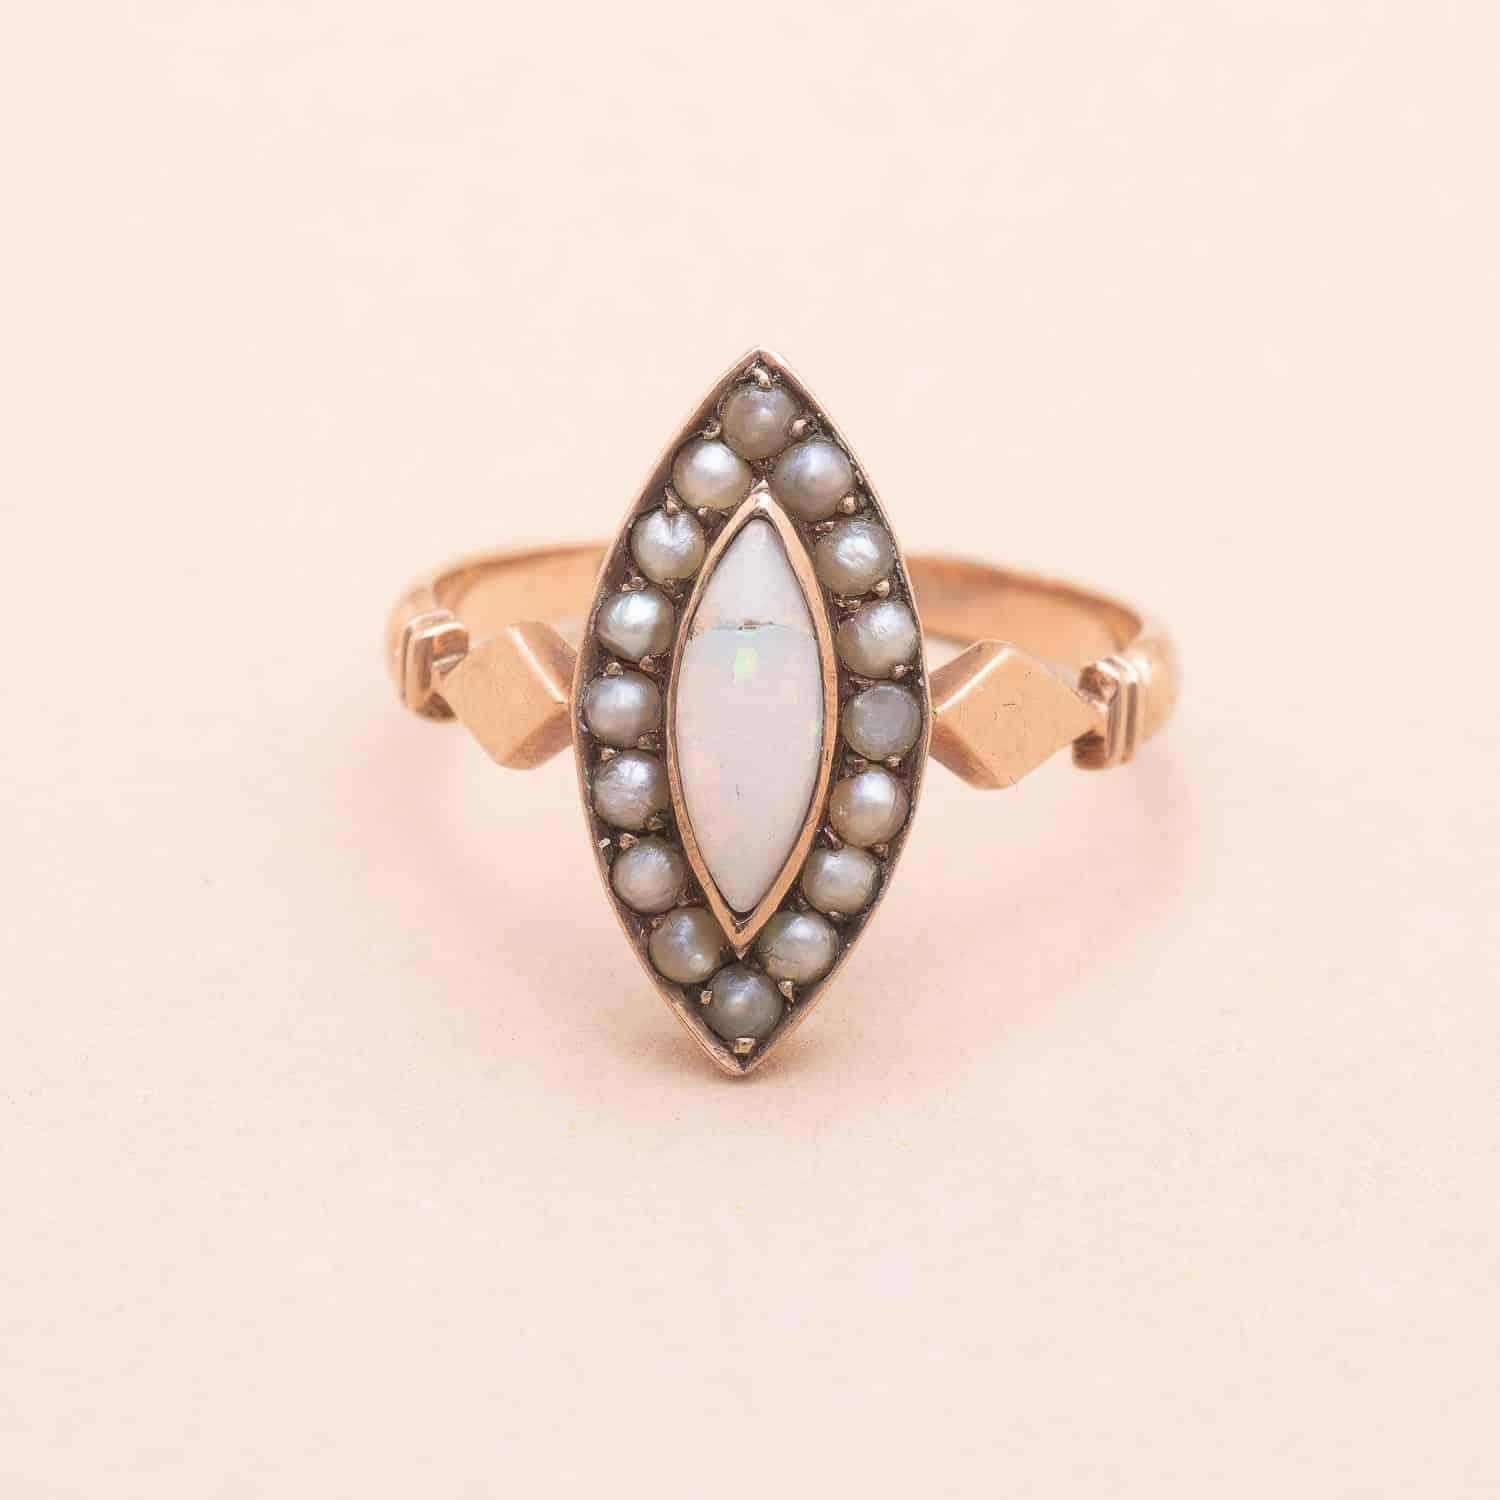 8K (333°/00) rose gold opal and seed pearls marquise ring.

Diamond-shaped shoulders.

Slight deformation of the bridge.

Hallmark 333

English craftsmanship - circa 1900 

Ring size : 52 (FR) / 6(US)

Gross weight : 2.04g